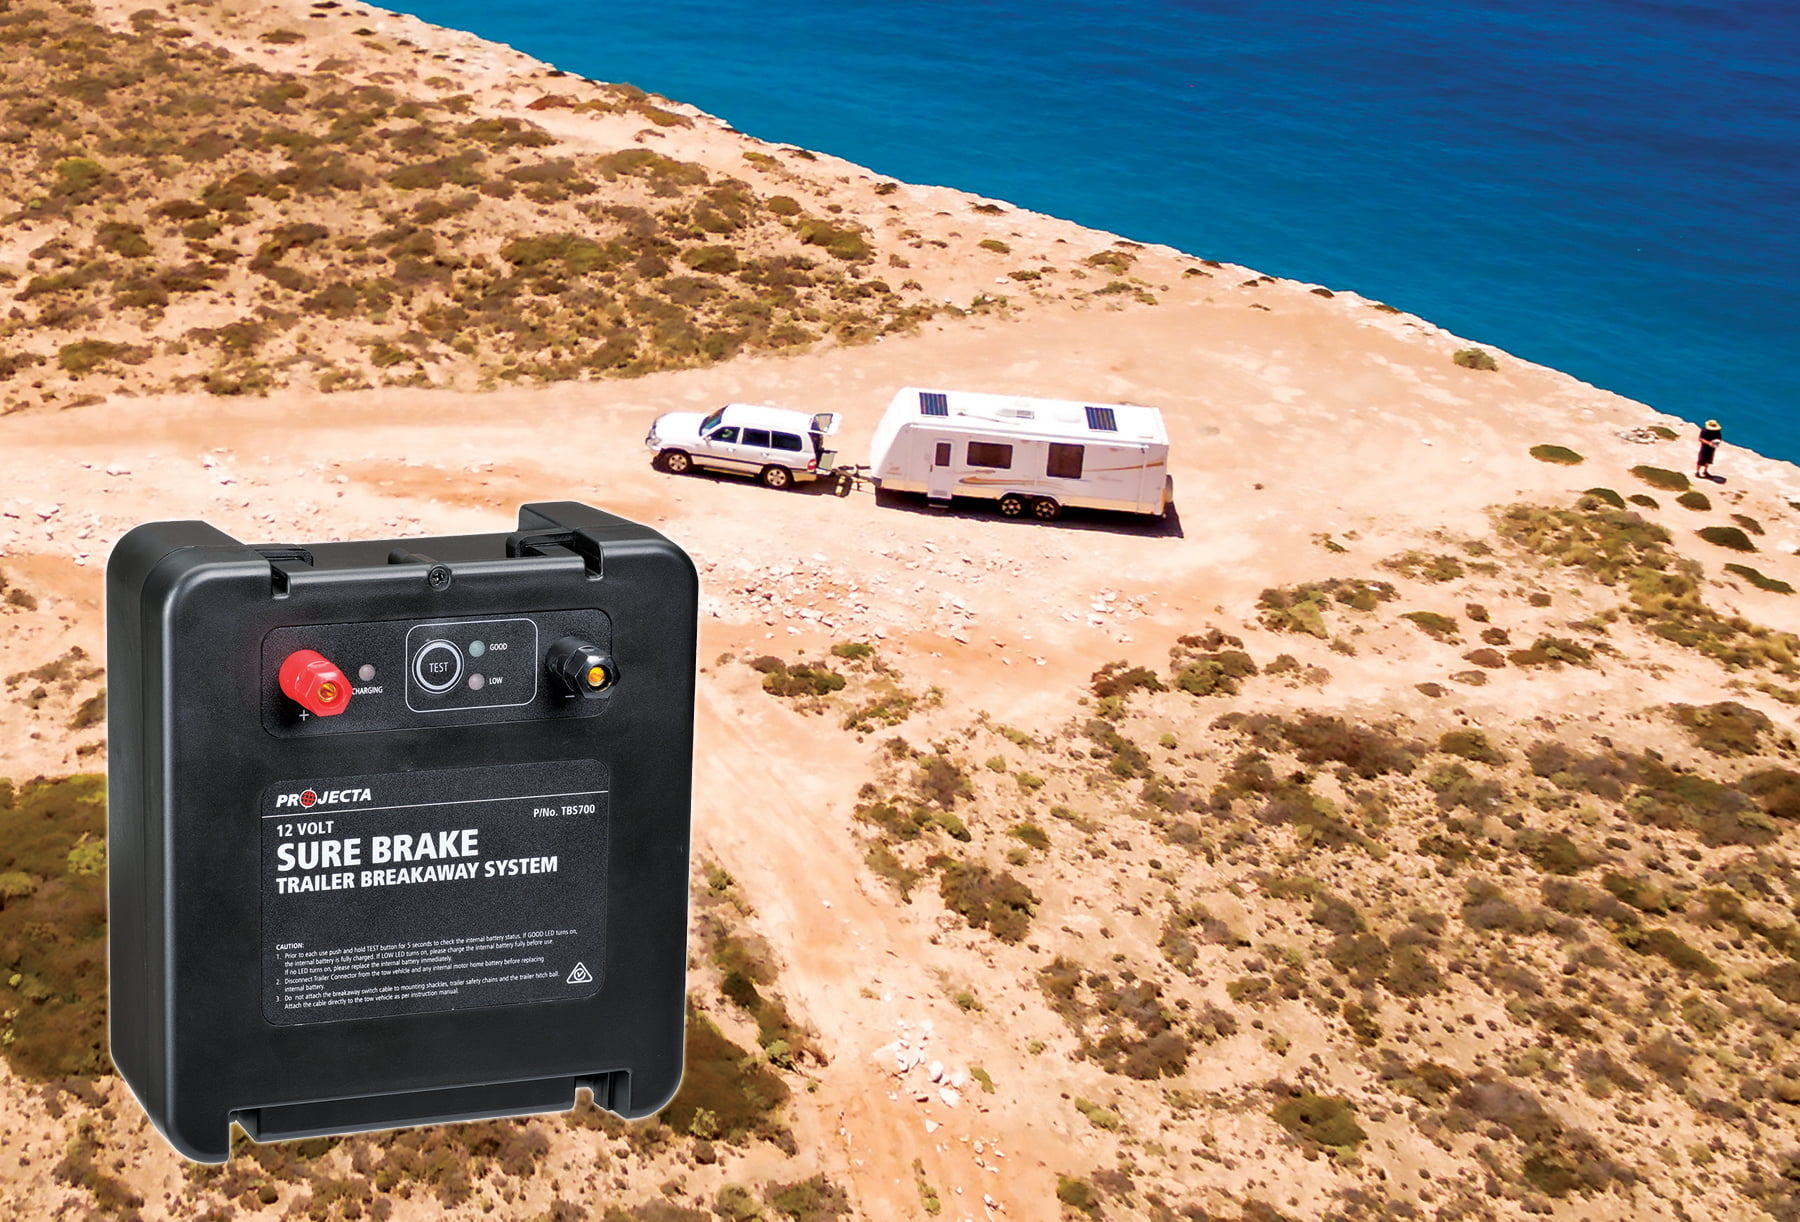 Projecta has released its new 'Sure Brake' Trailer Breakaway Kit, ensuring safety in a towing disconnection emergency.